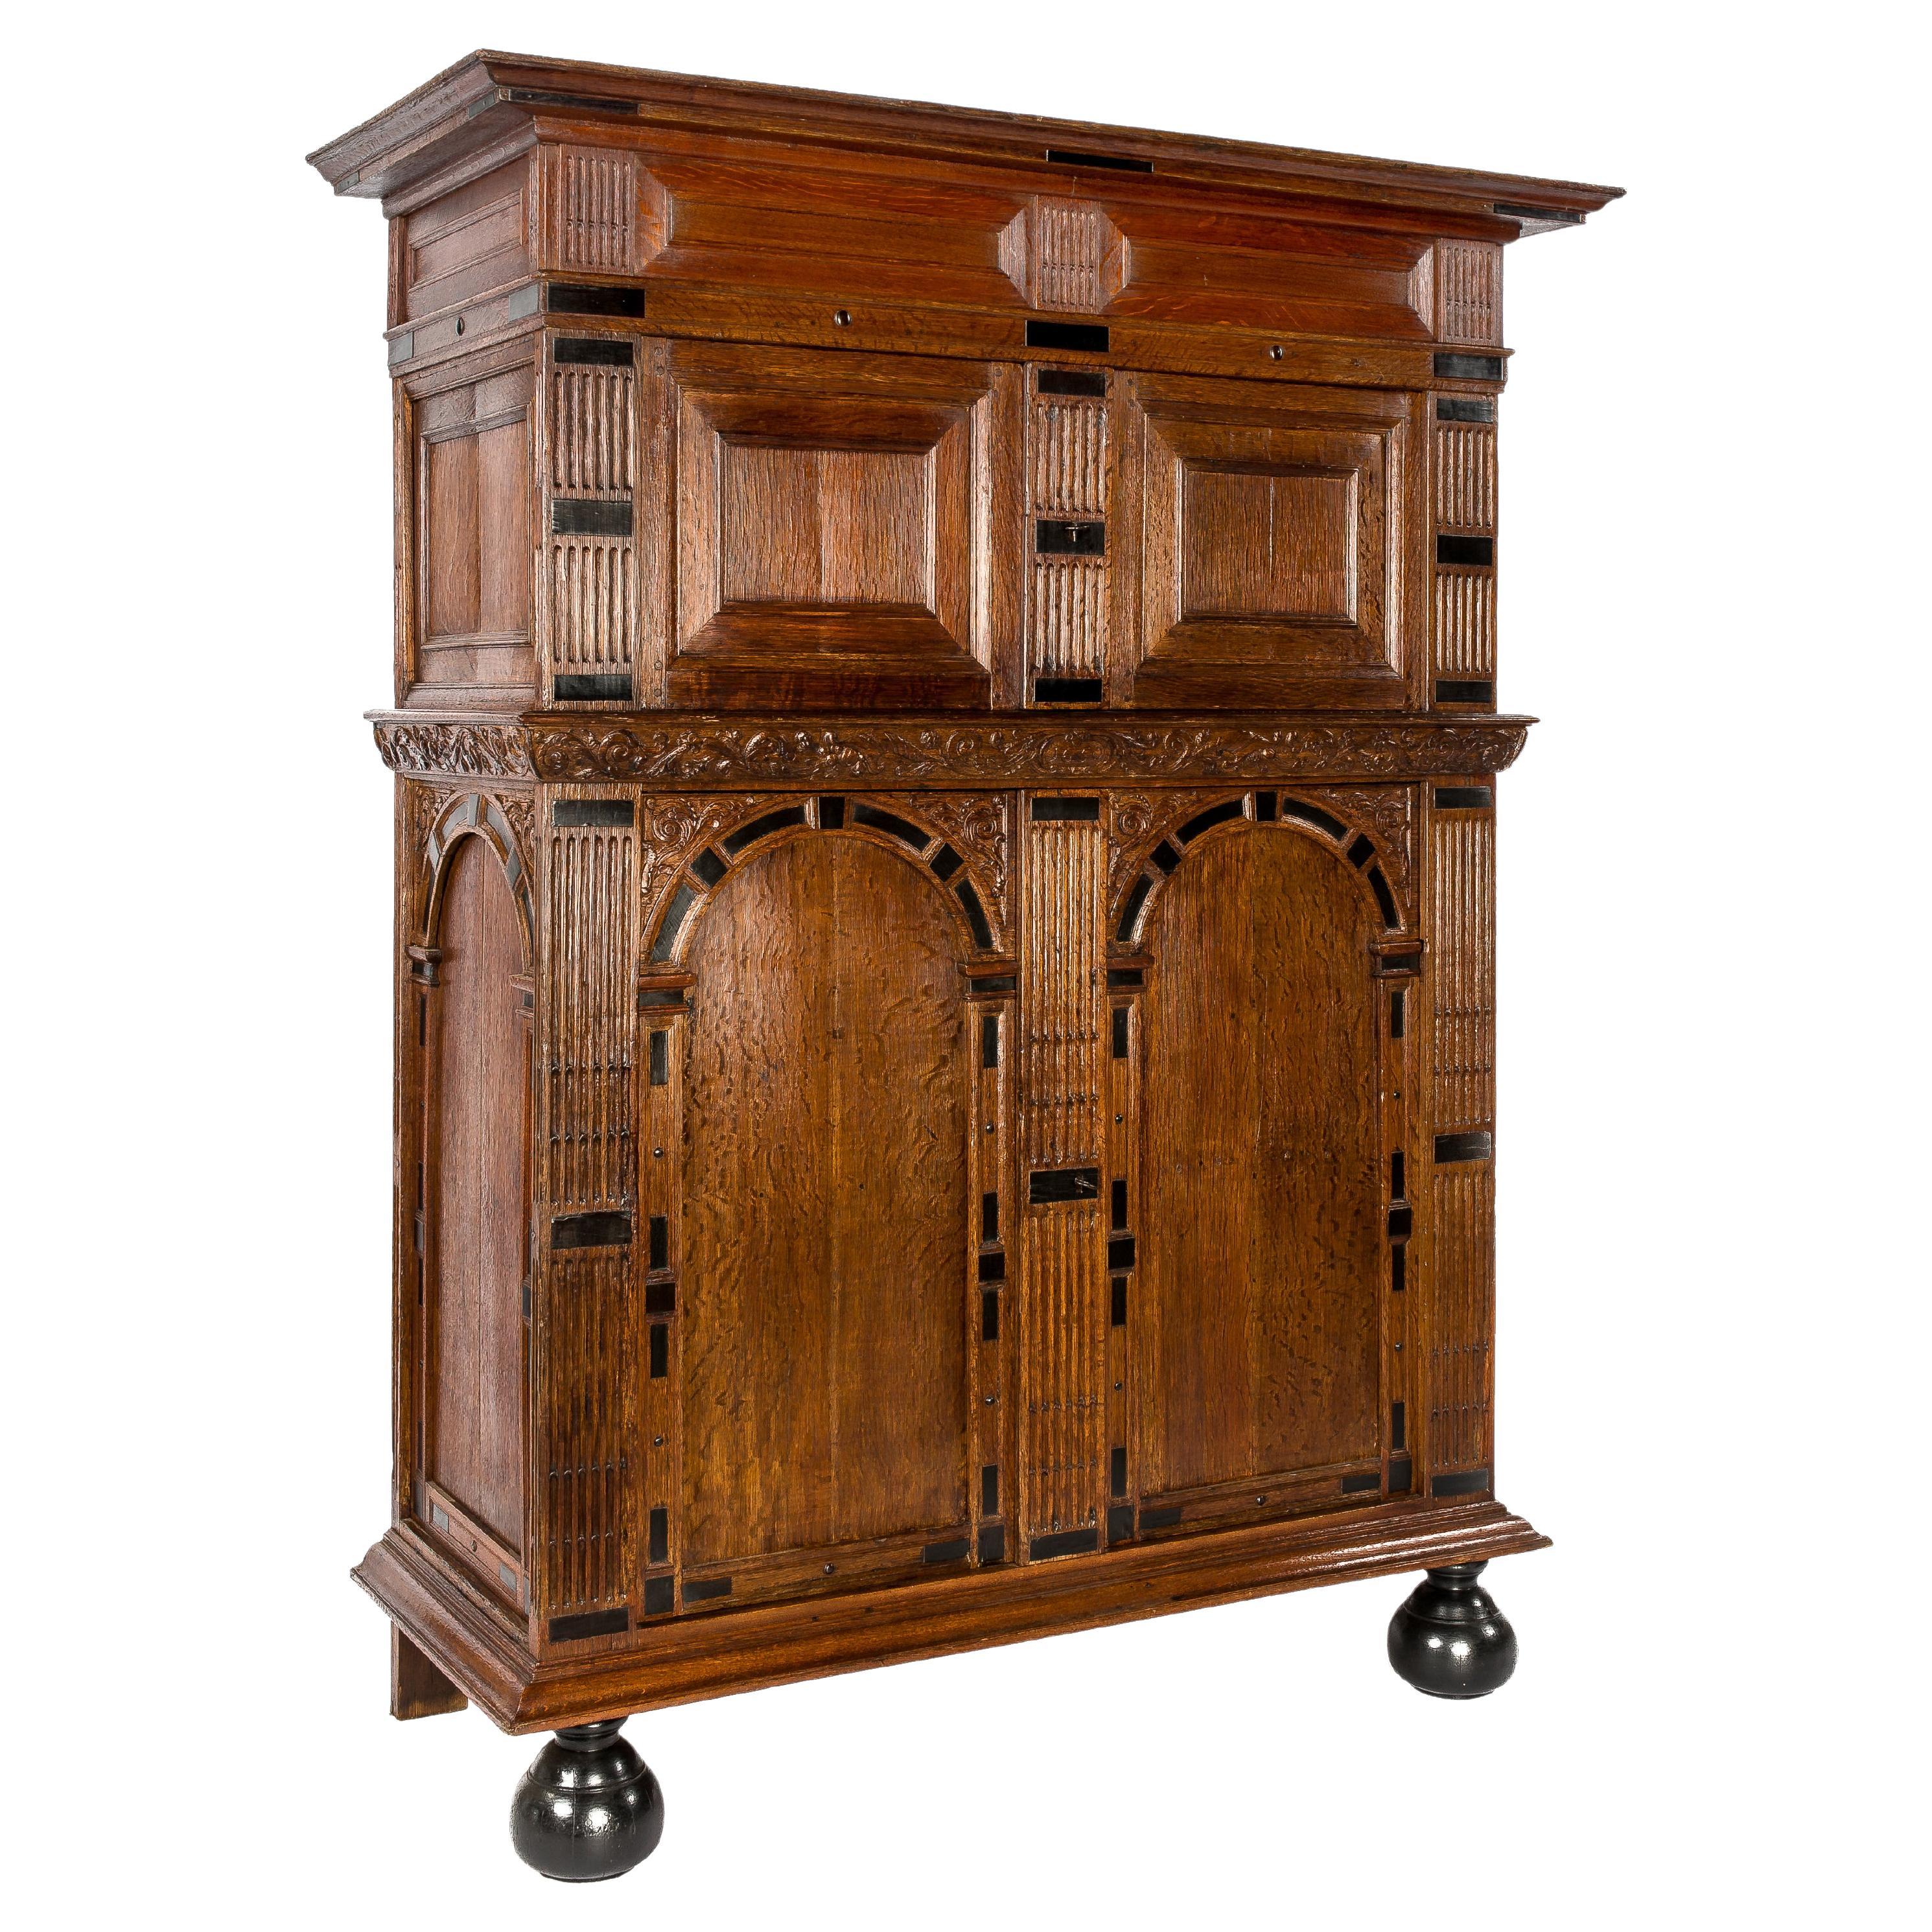 17th Century Dutch Renaissance Oak and Ebony Inlay Four-Door Cabinet Dated 1660 For Sale